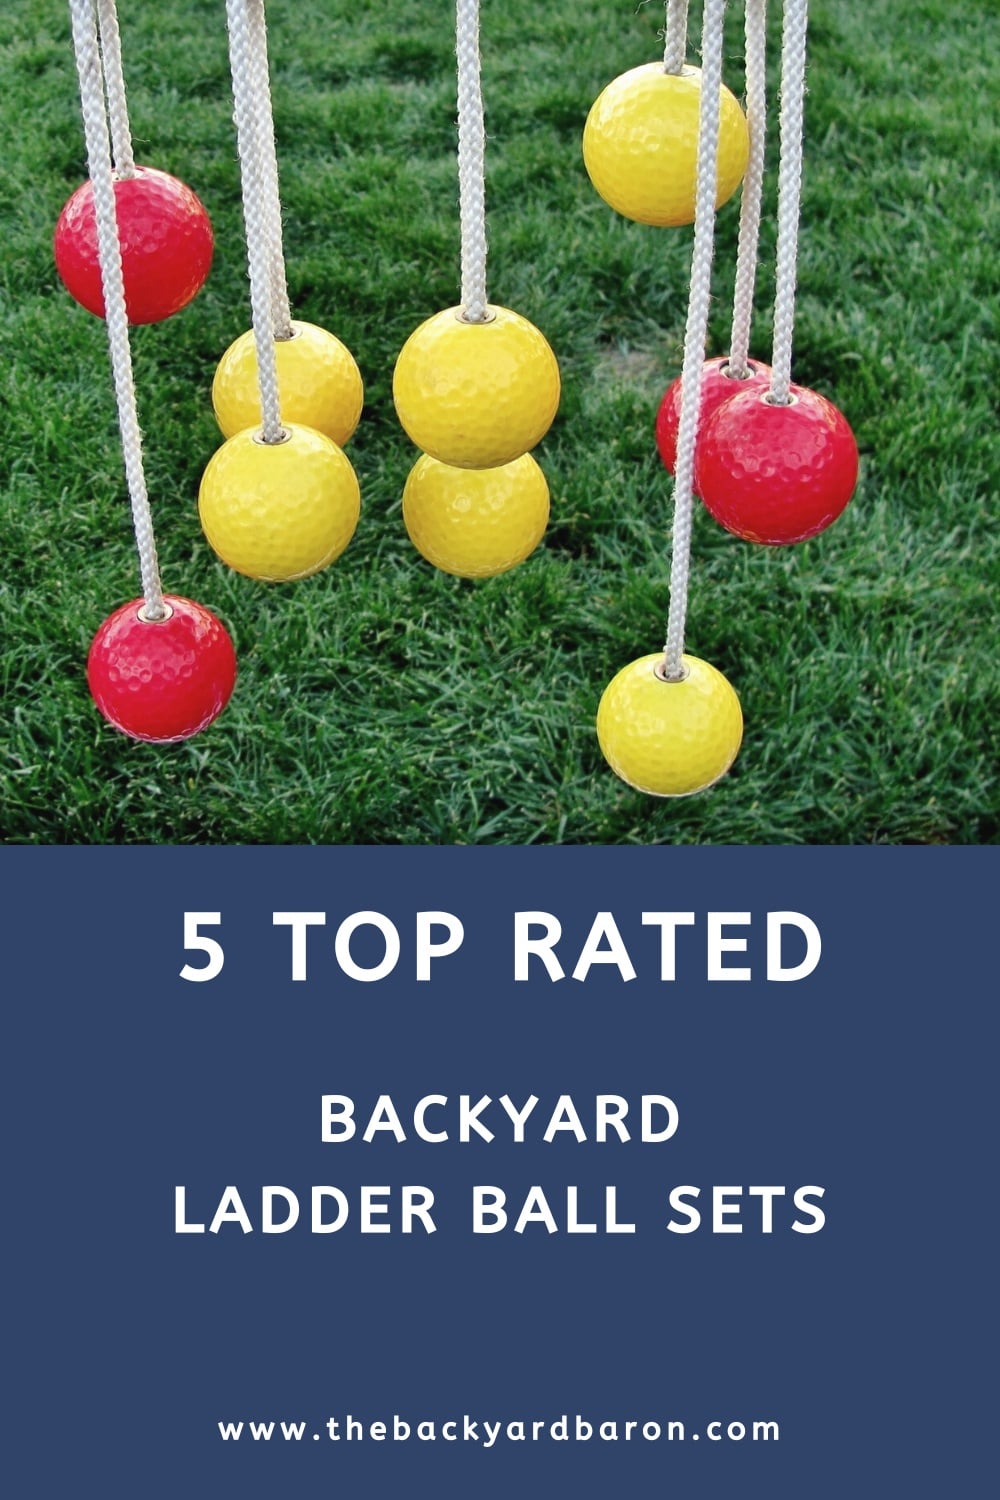 5 Top rated ladder ball sets